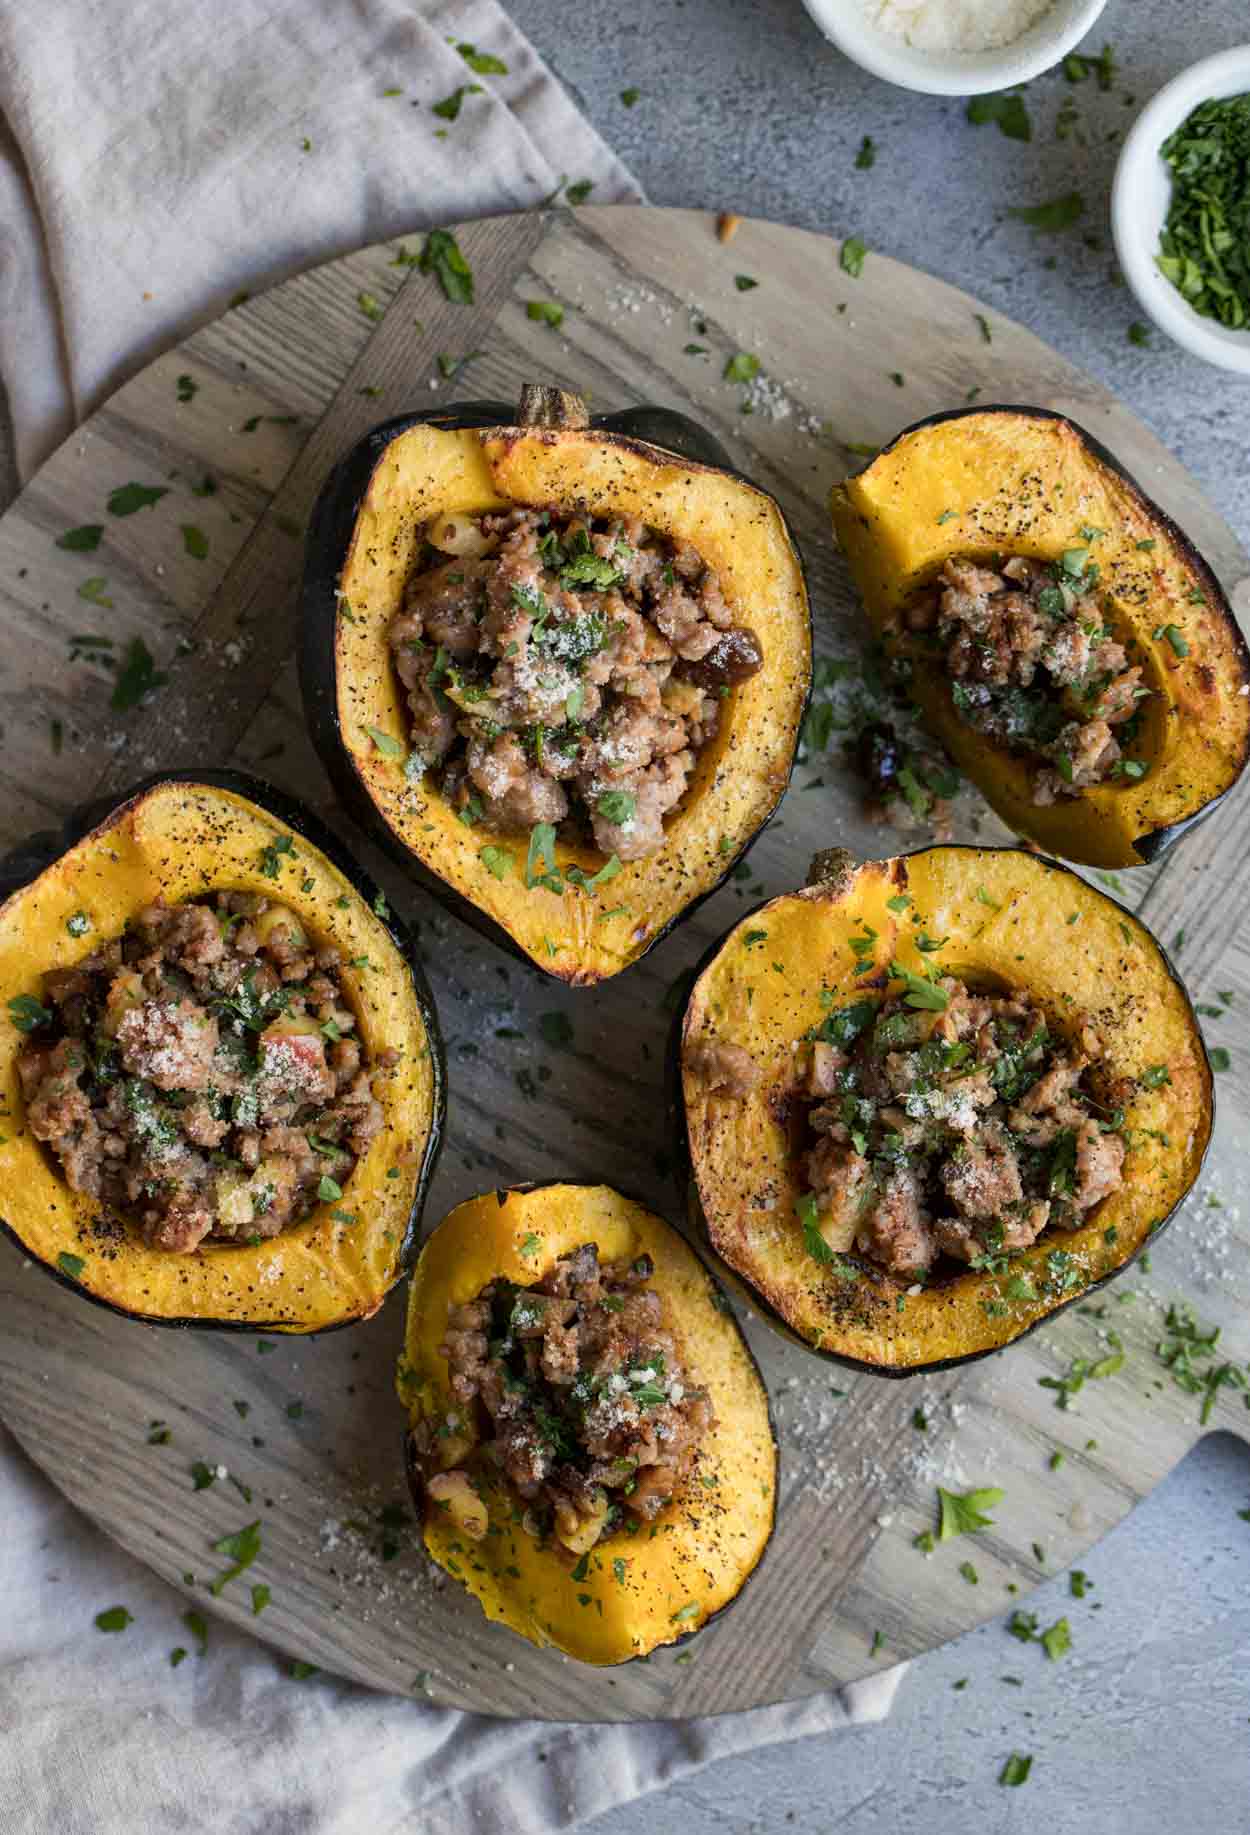 Roasted acorn squash with pork sausage and apple and chestnut stuffing 